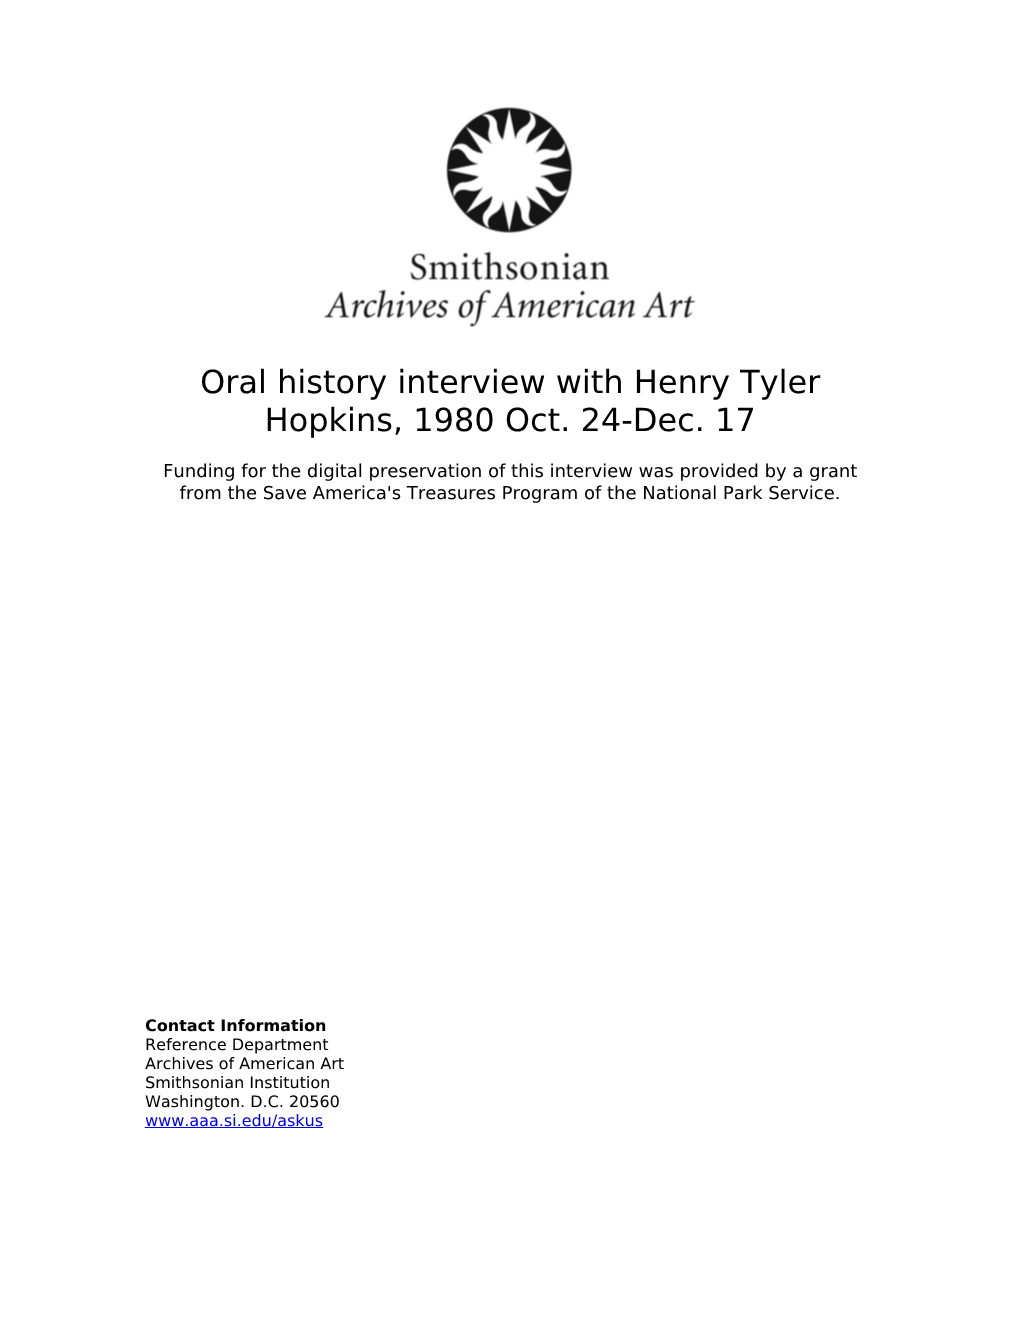 Oral History Interview with Henry Tyler Hopkins, 1980 Oct. 24-Dec. 17